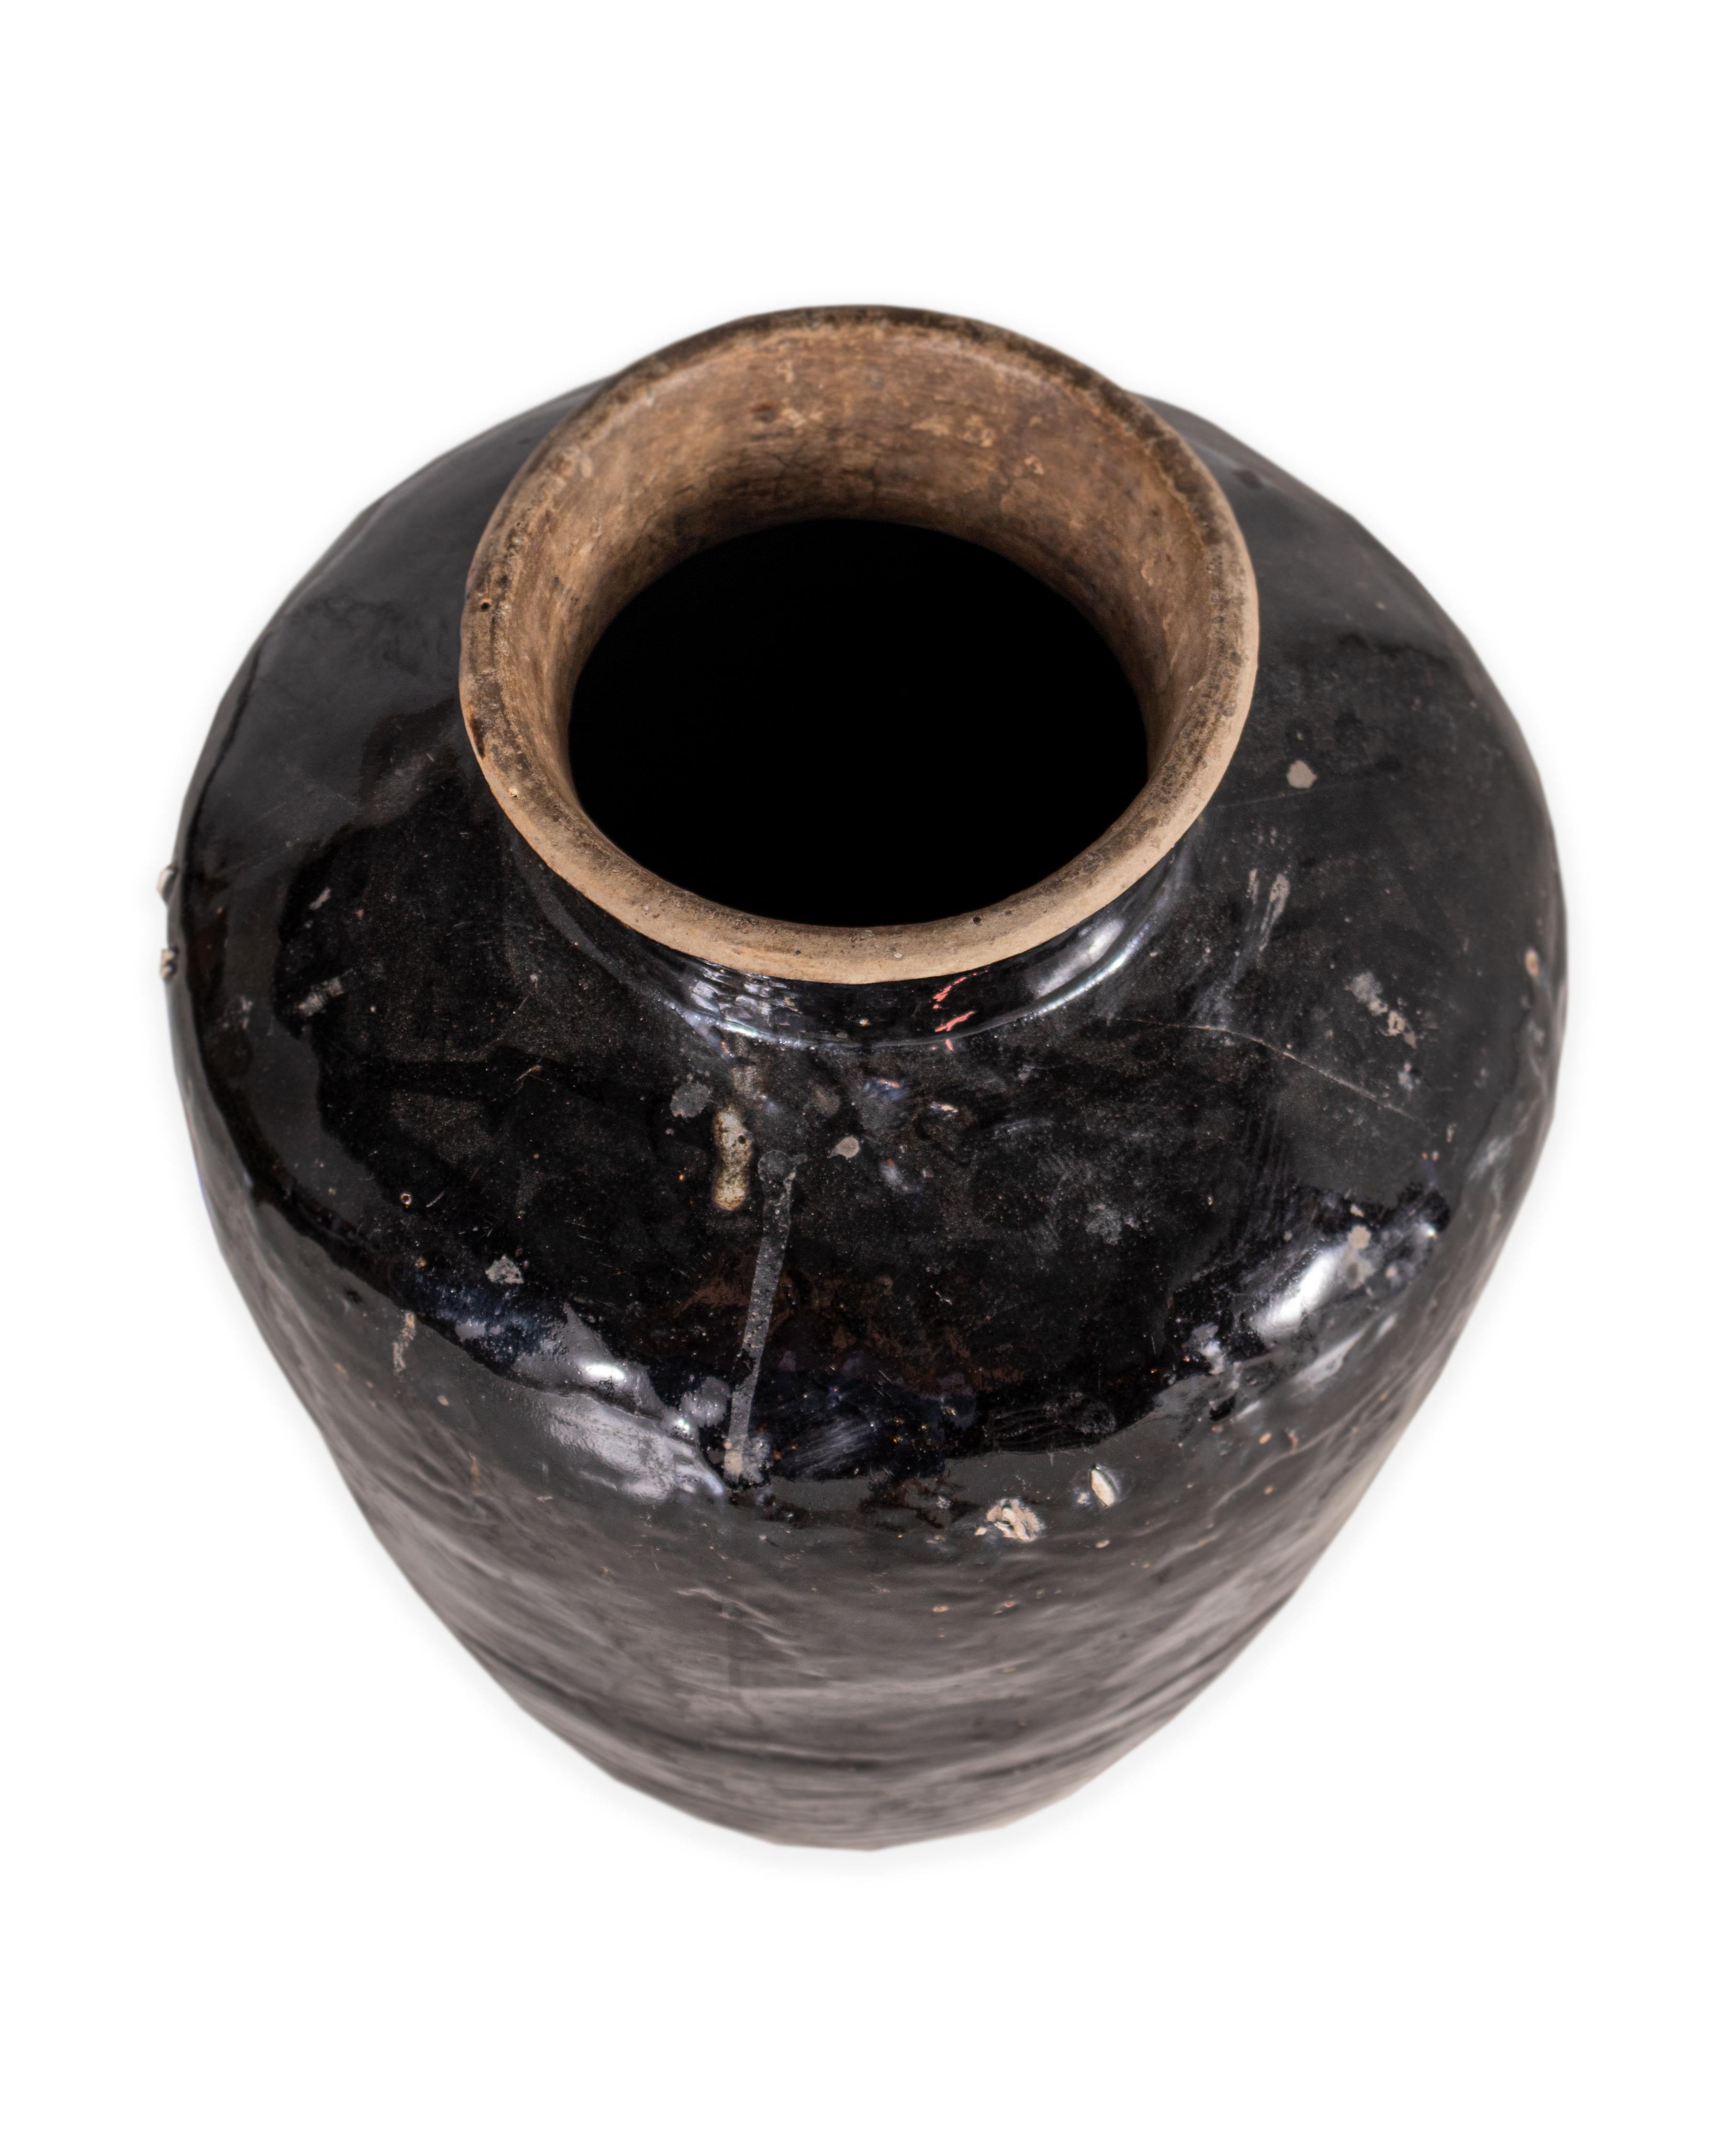 Ceramic glazed storage jar, or pot decor. Designed in my organic, contemporary, and mid-centrury modern style.

Piece from our one of a kind Le Monde collection. Exclusive to Brendan Bass. 

